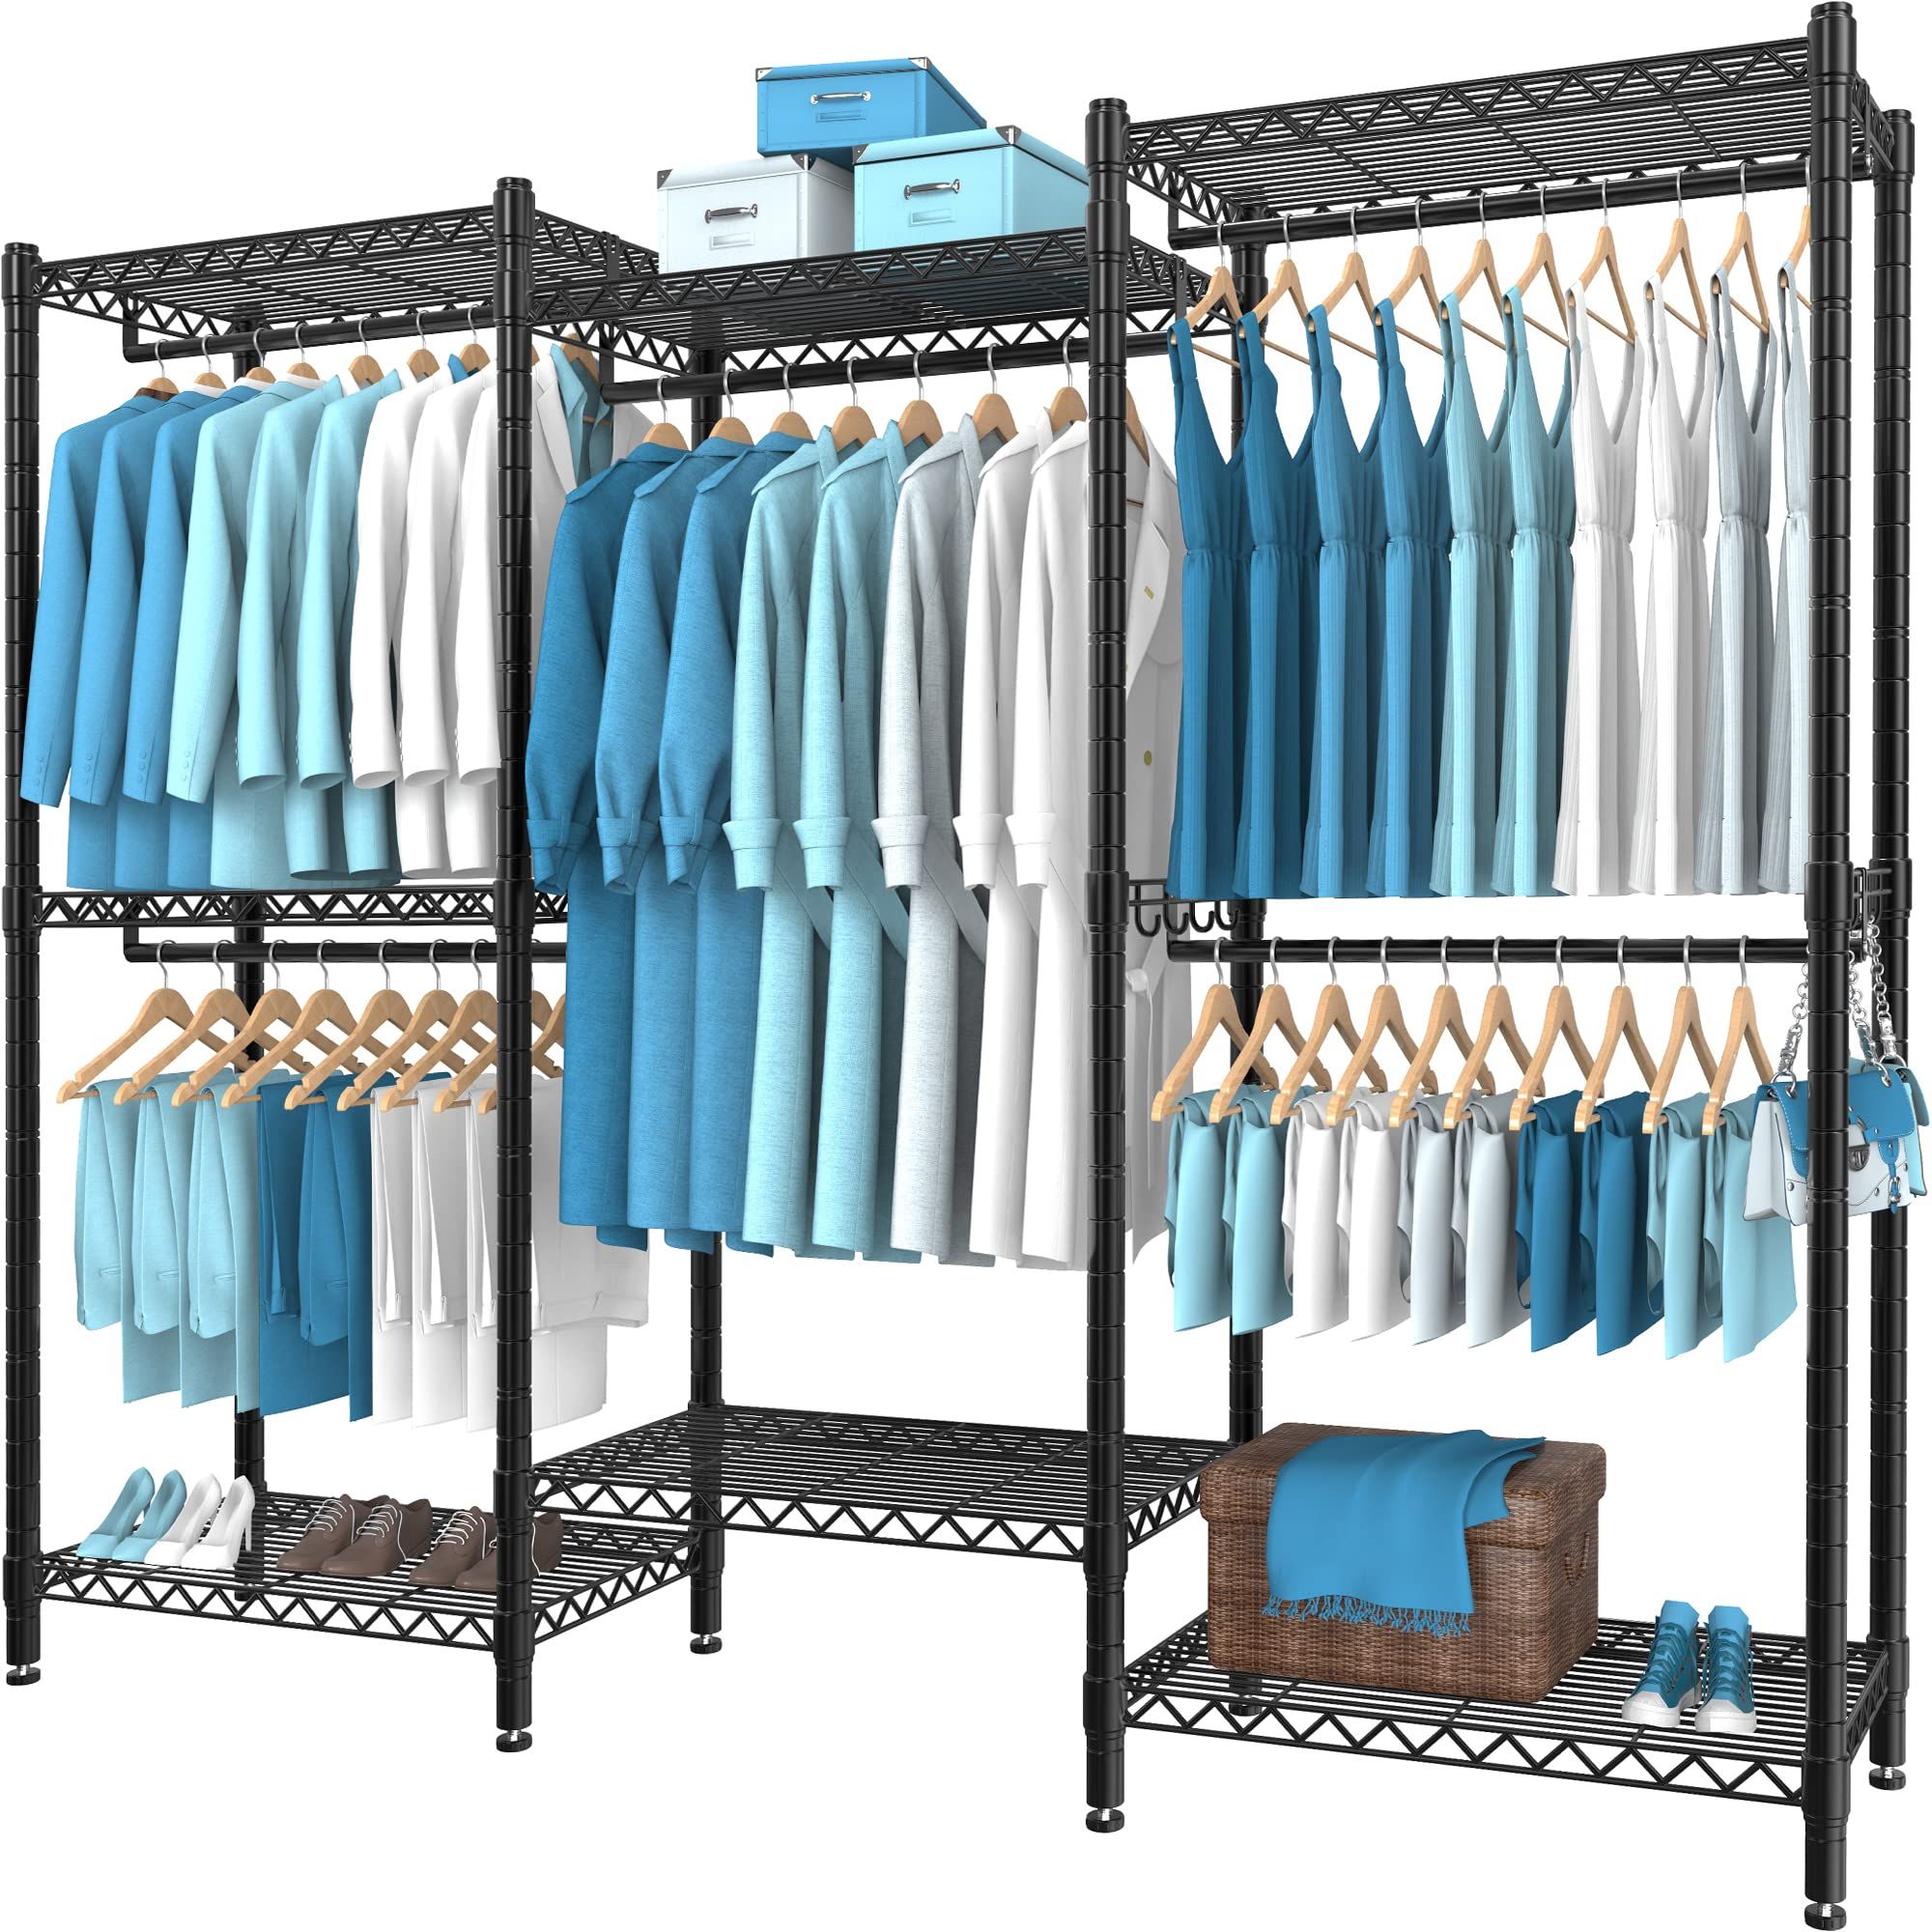 Wire Garment Rack Wardrobes Pertaining To Well Known Amazon: Punion Portable Wardrobe Rack, 7 Tiers Wire Shelving Black Garment  Rack, Compact Extra Large Clothing Racks Metal With 5 Hanging Rods, 1 Pair  Side Hooks For Hanging Clothes : Clothing, Shoes & Jewelry (Photo 7 of 10)